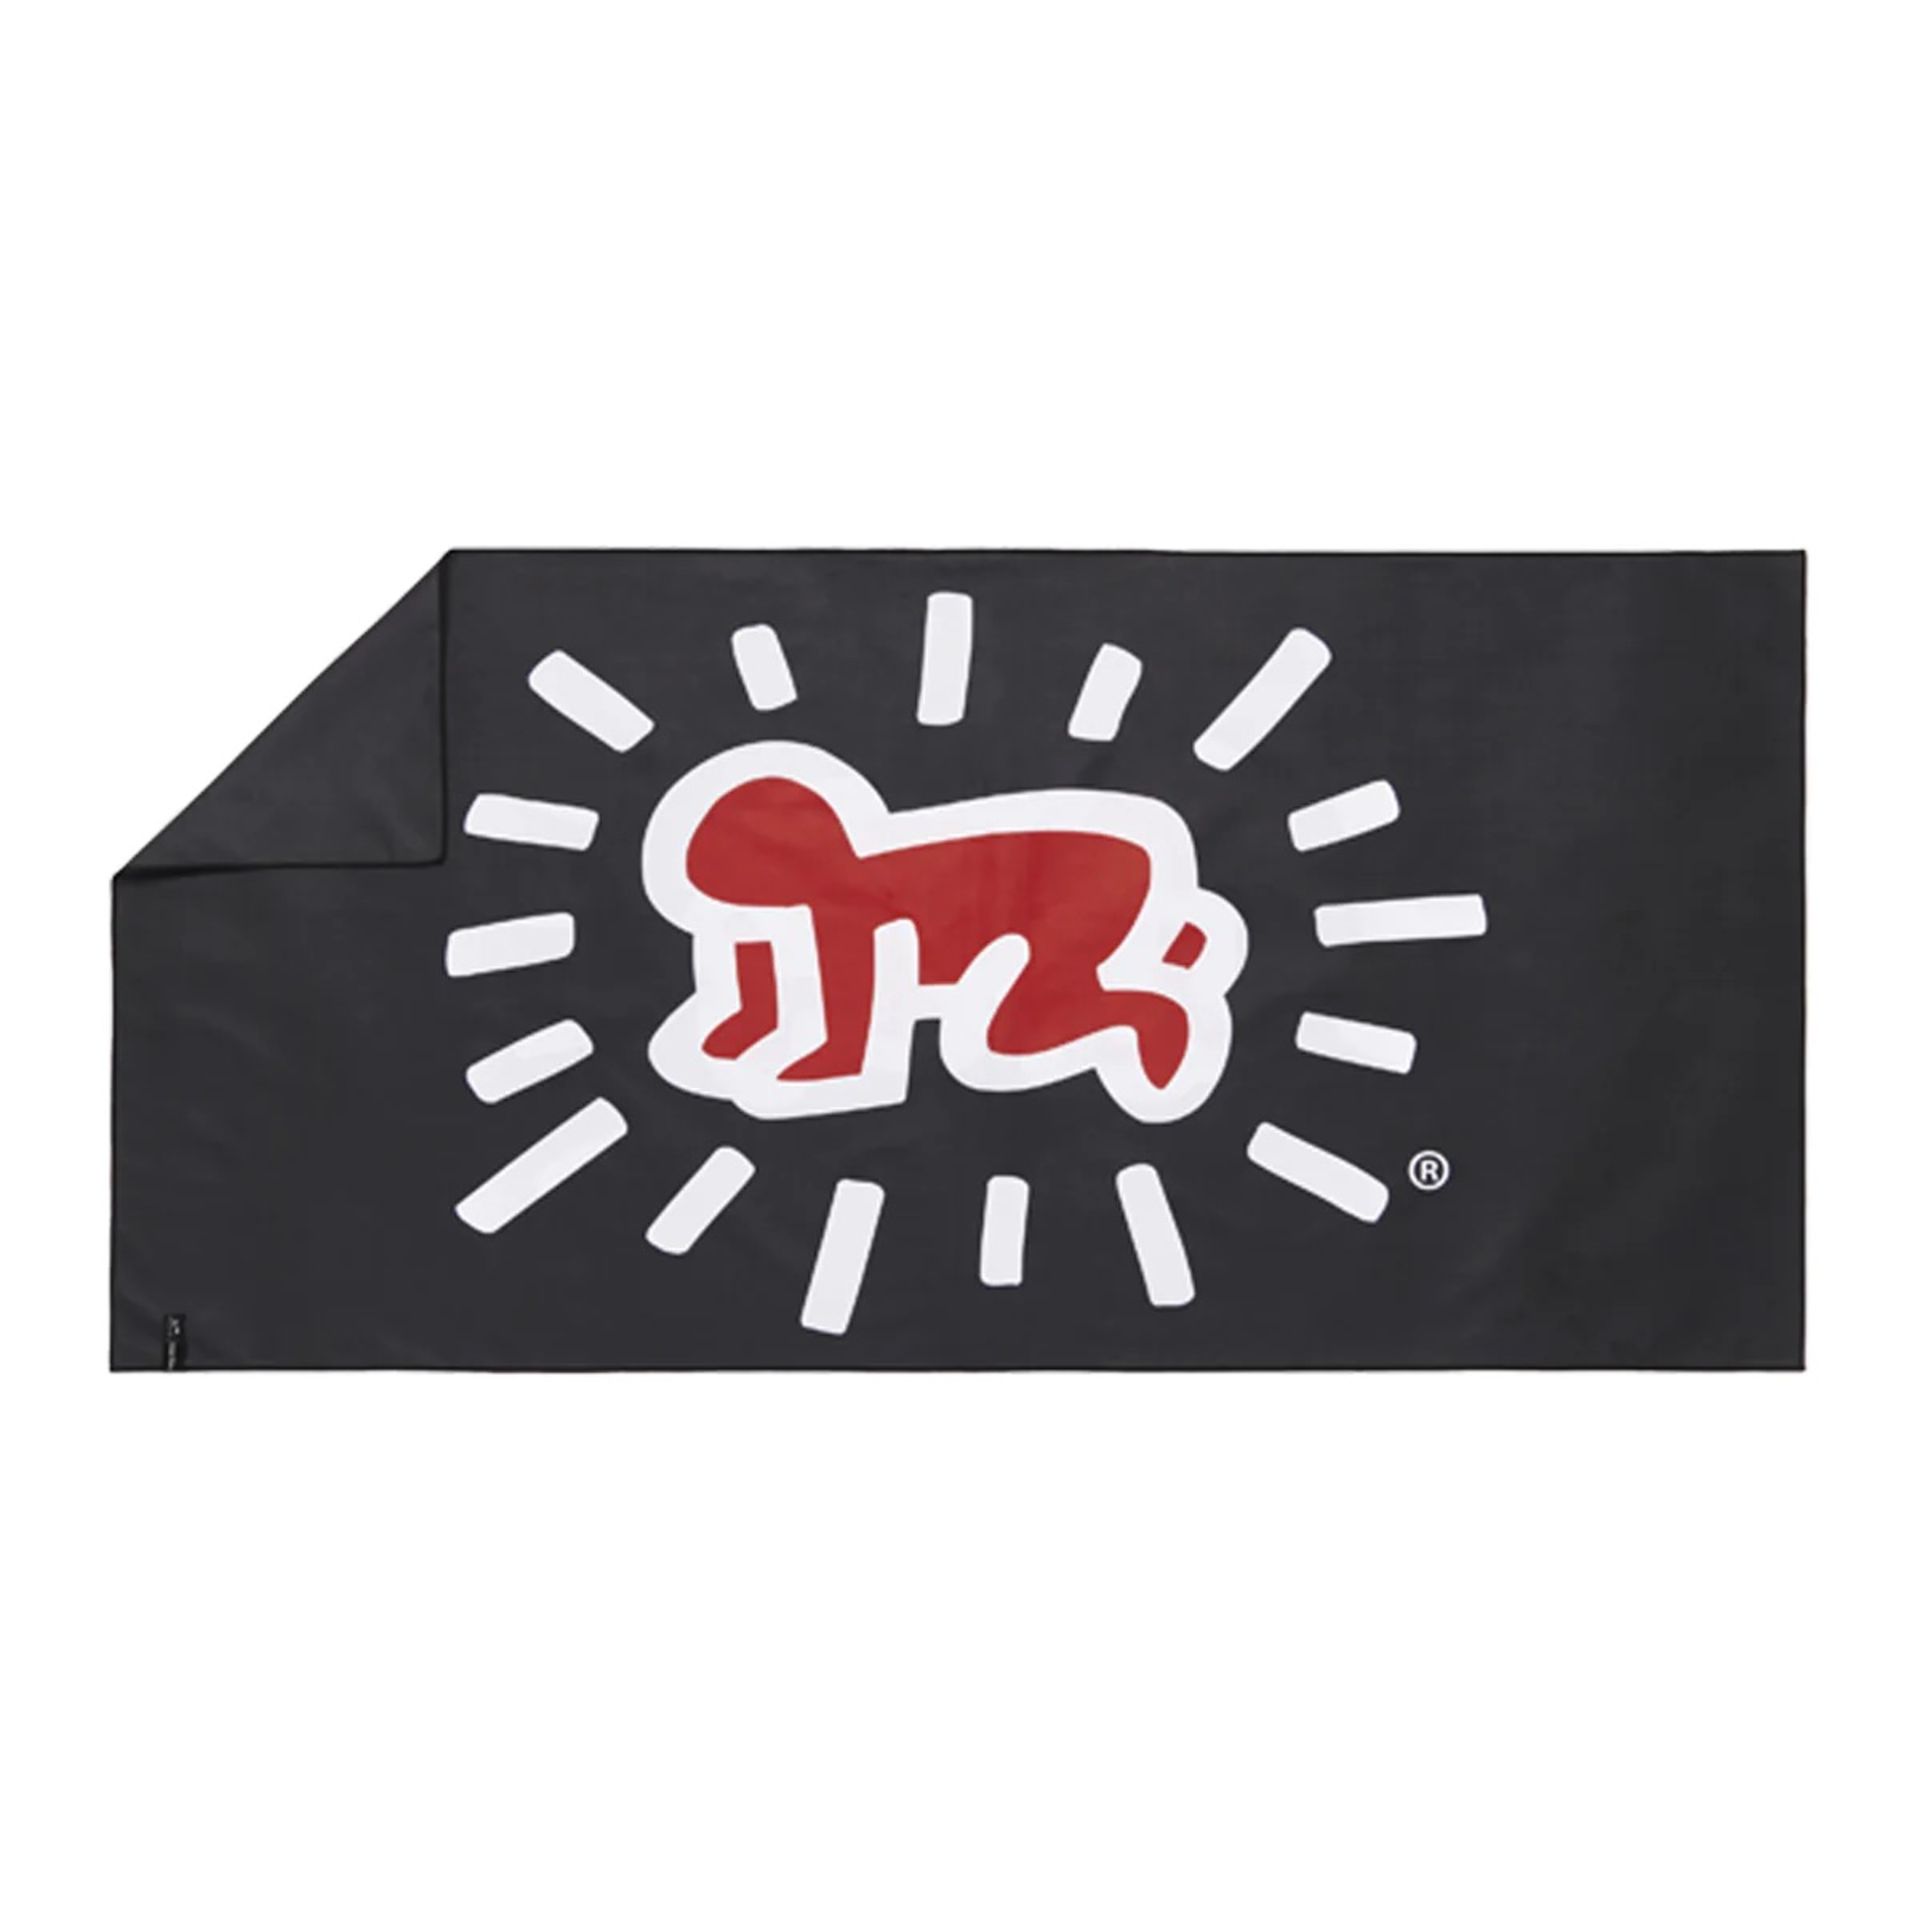 Keith Haring "Radiant Baby" Towel